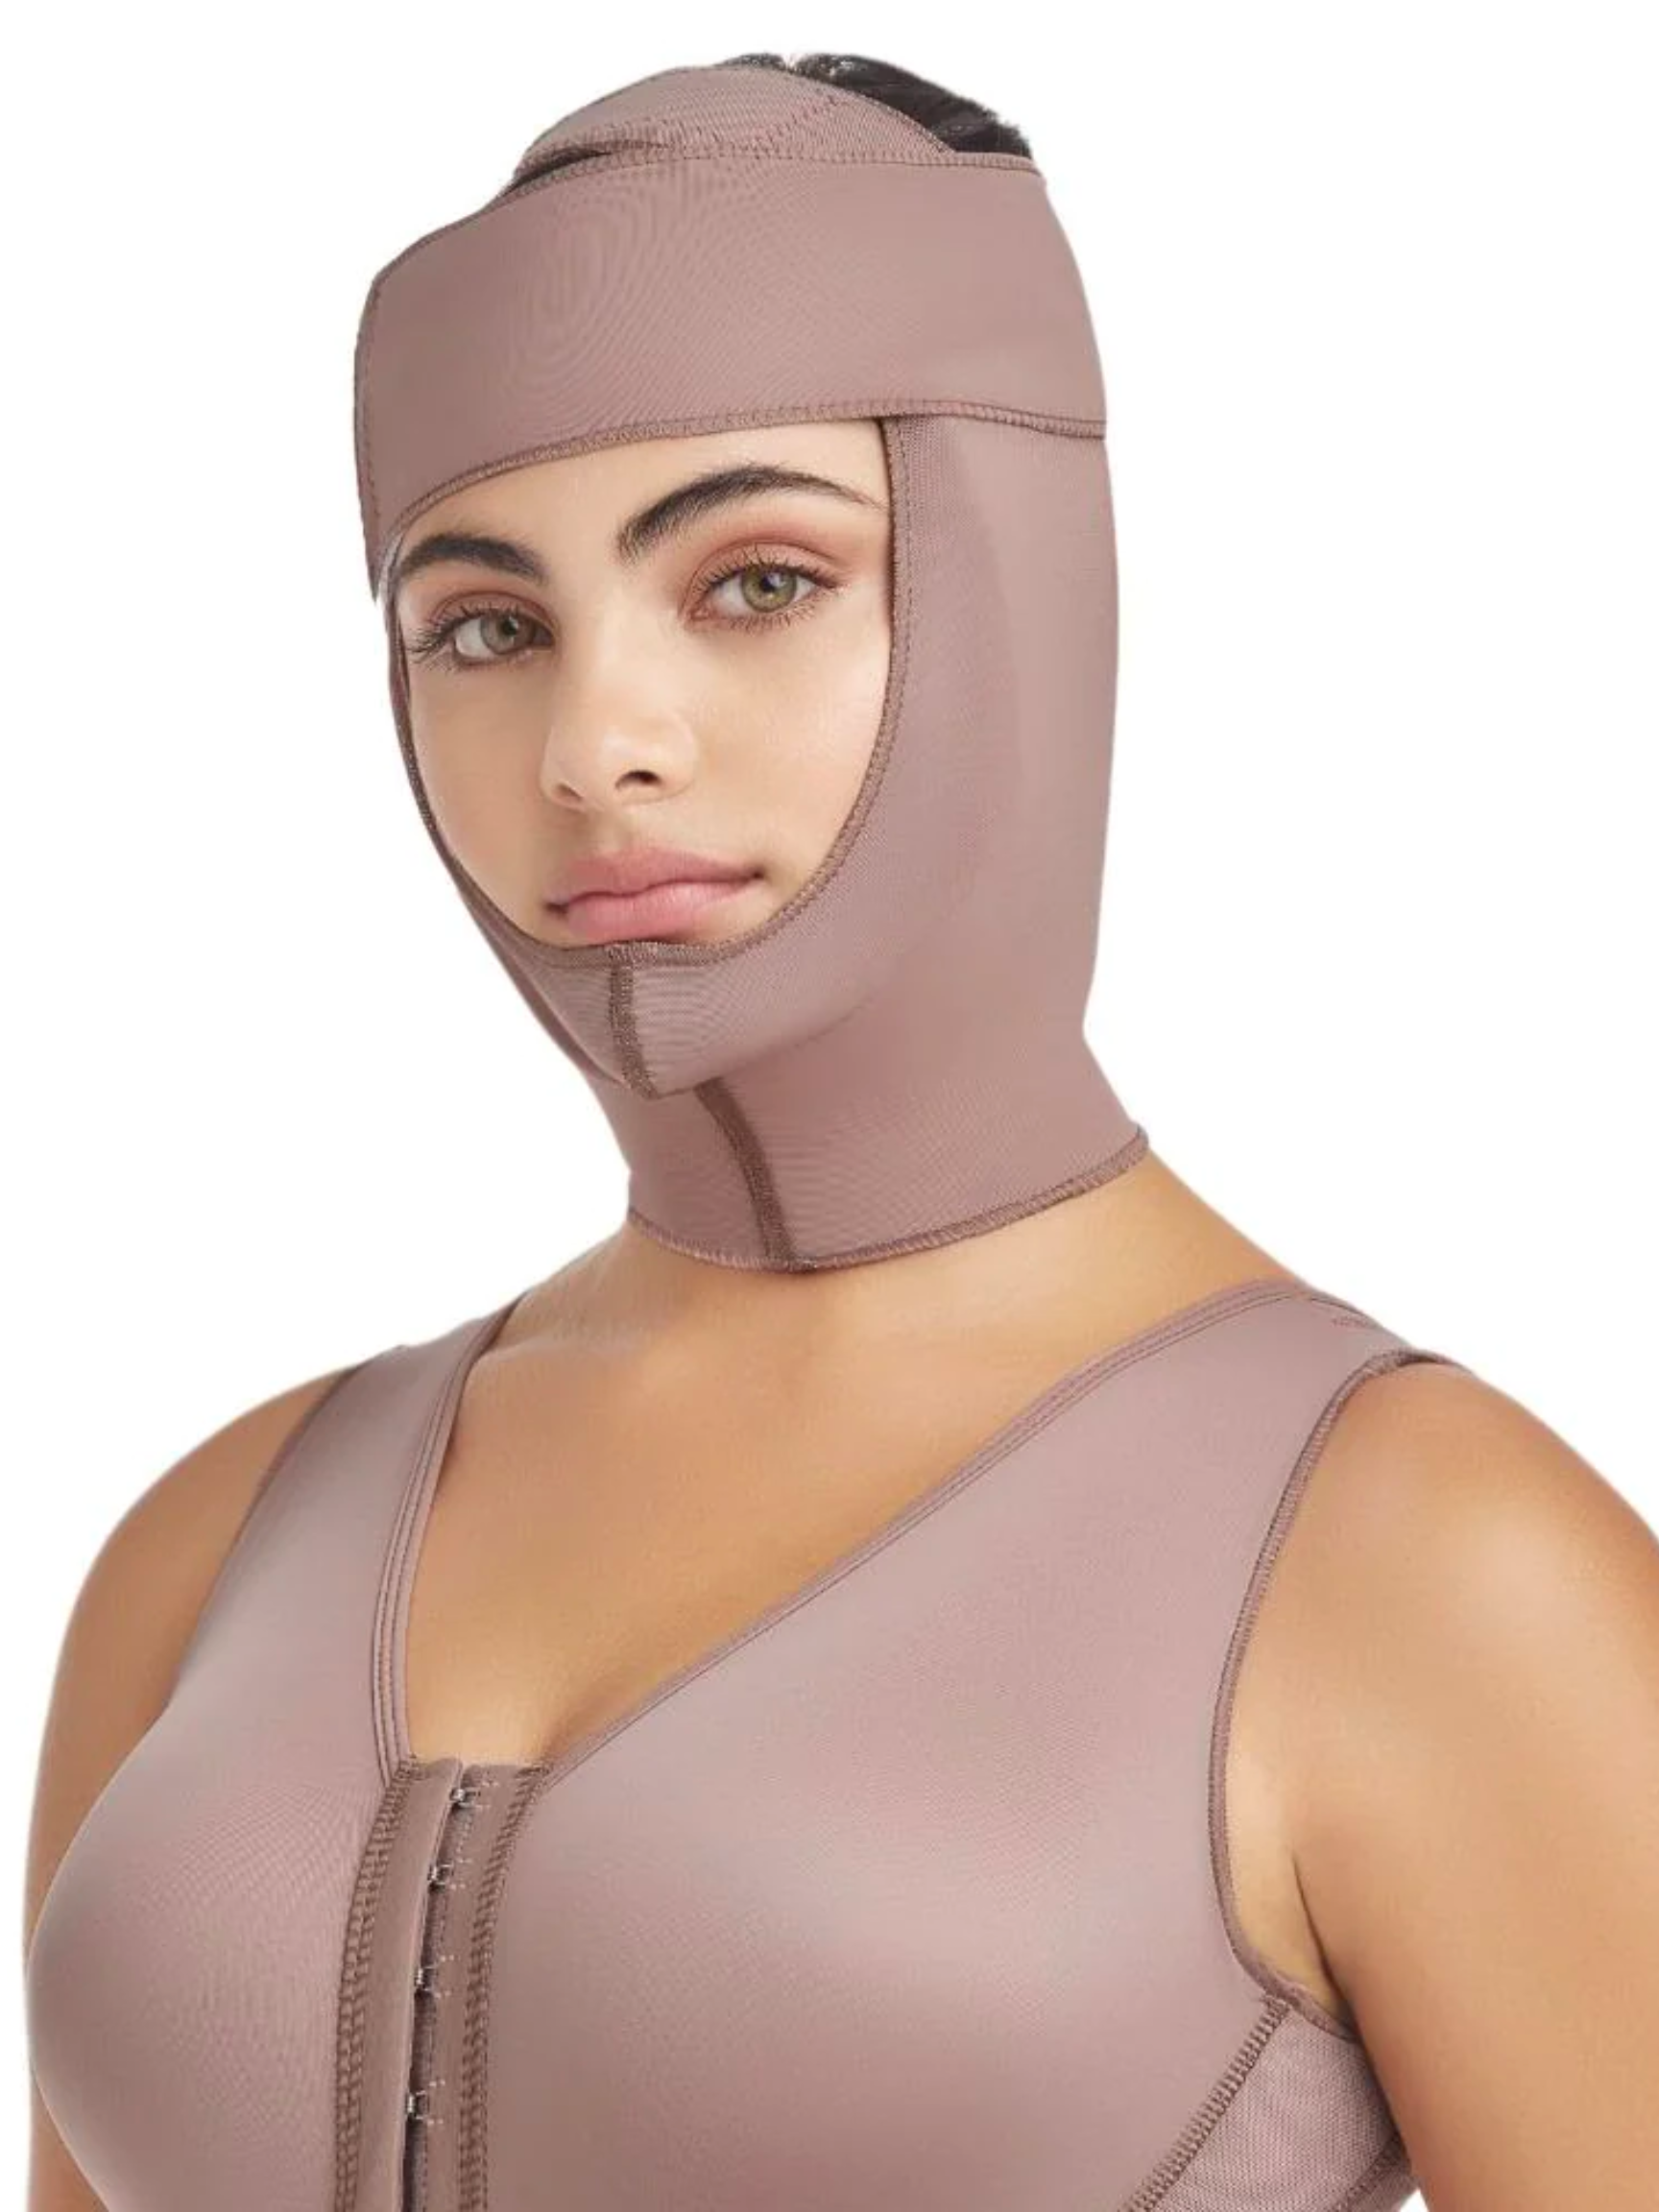 Post-Surgical Girdle for Chin, Neck, and Face: Ref: 09029 – Salud